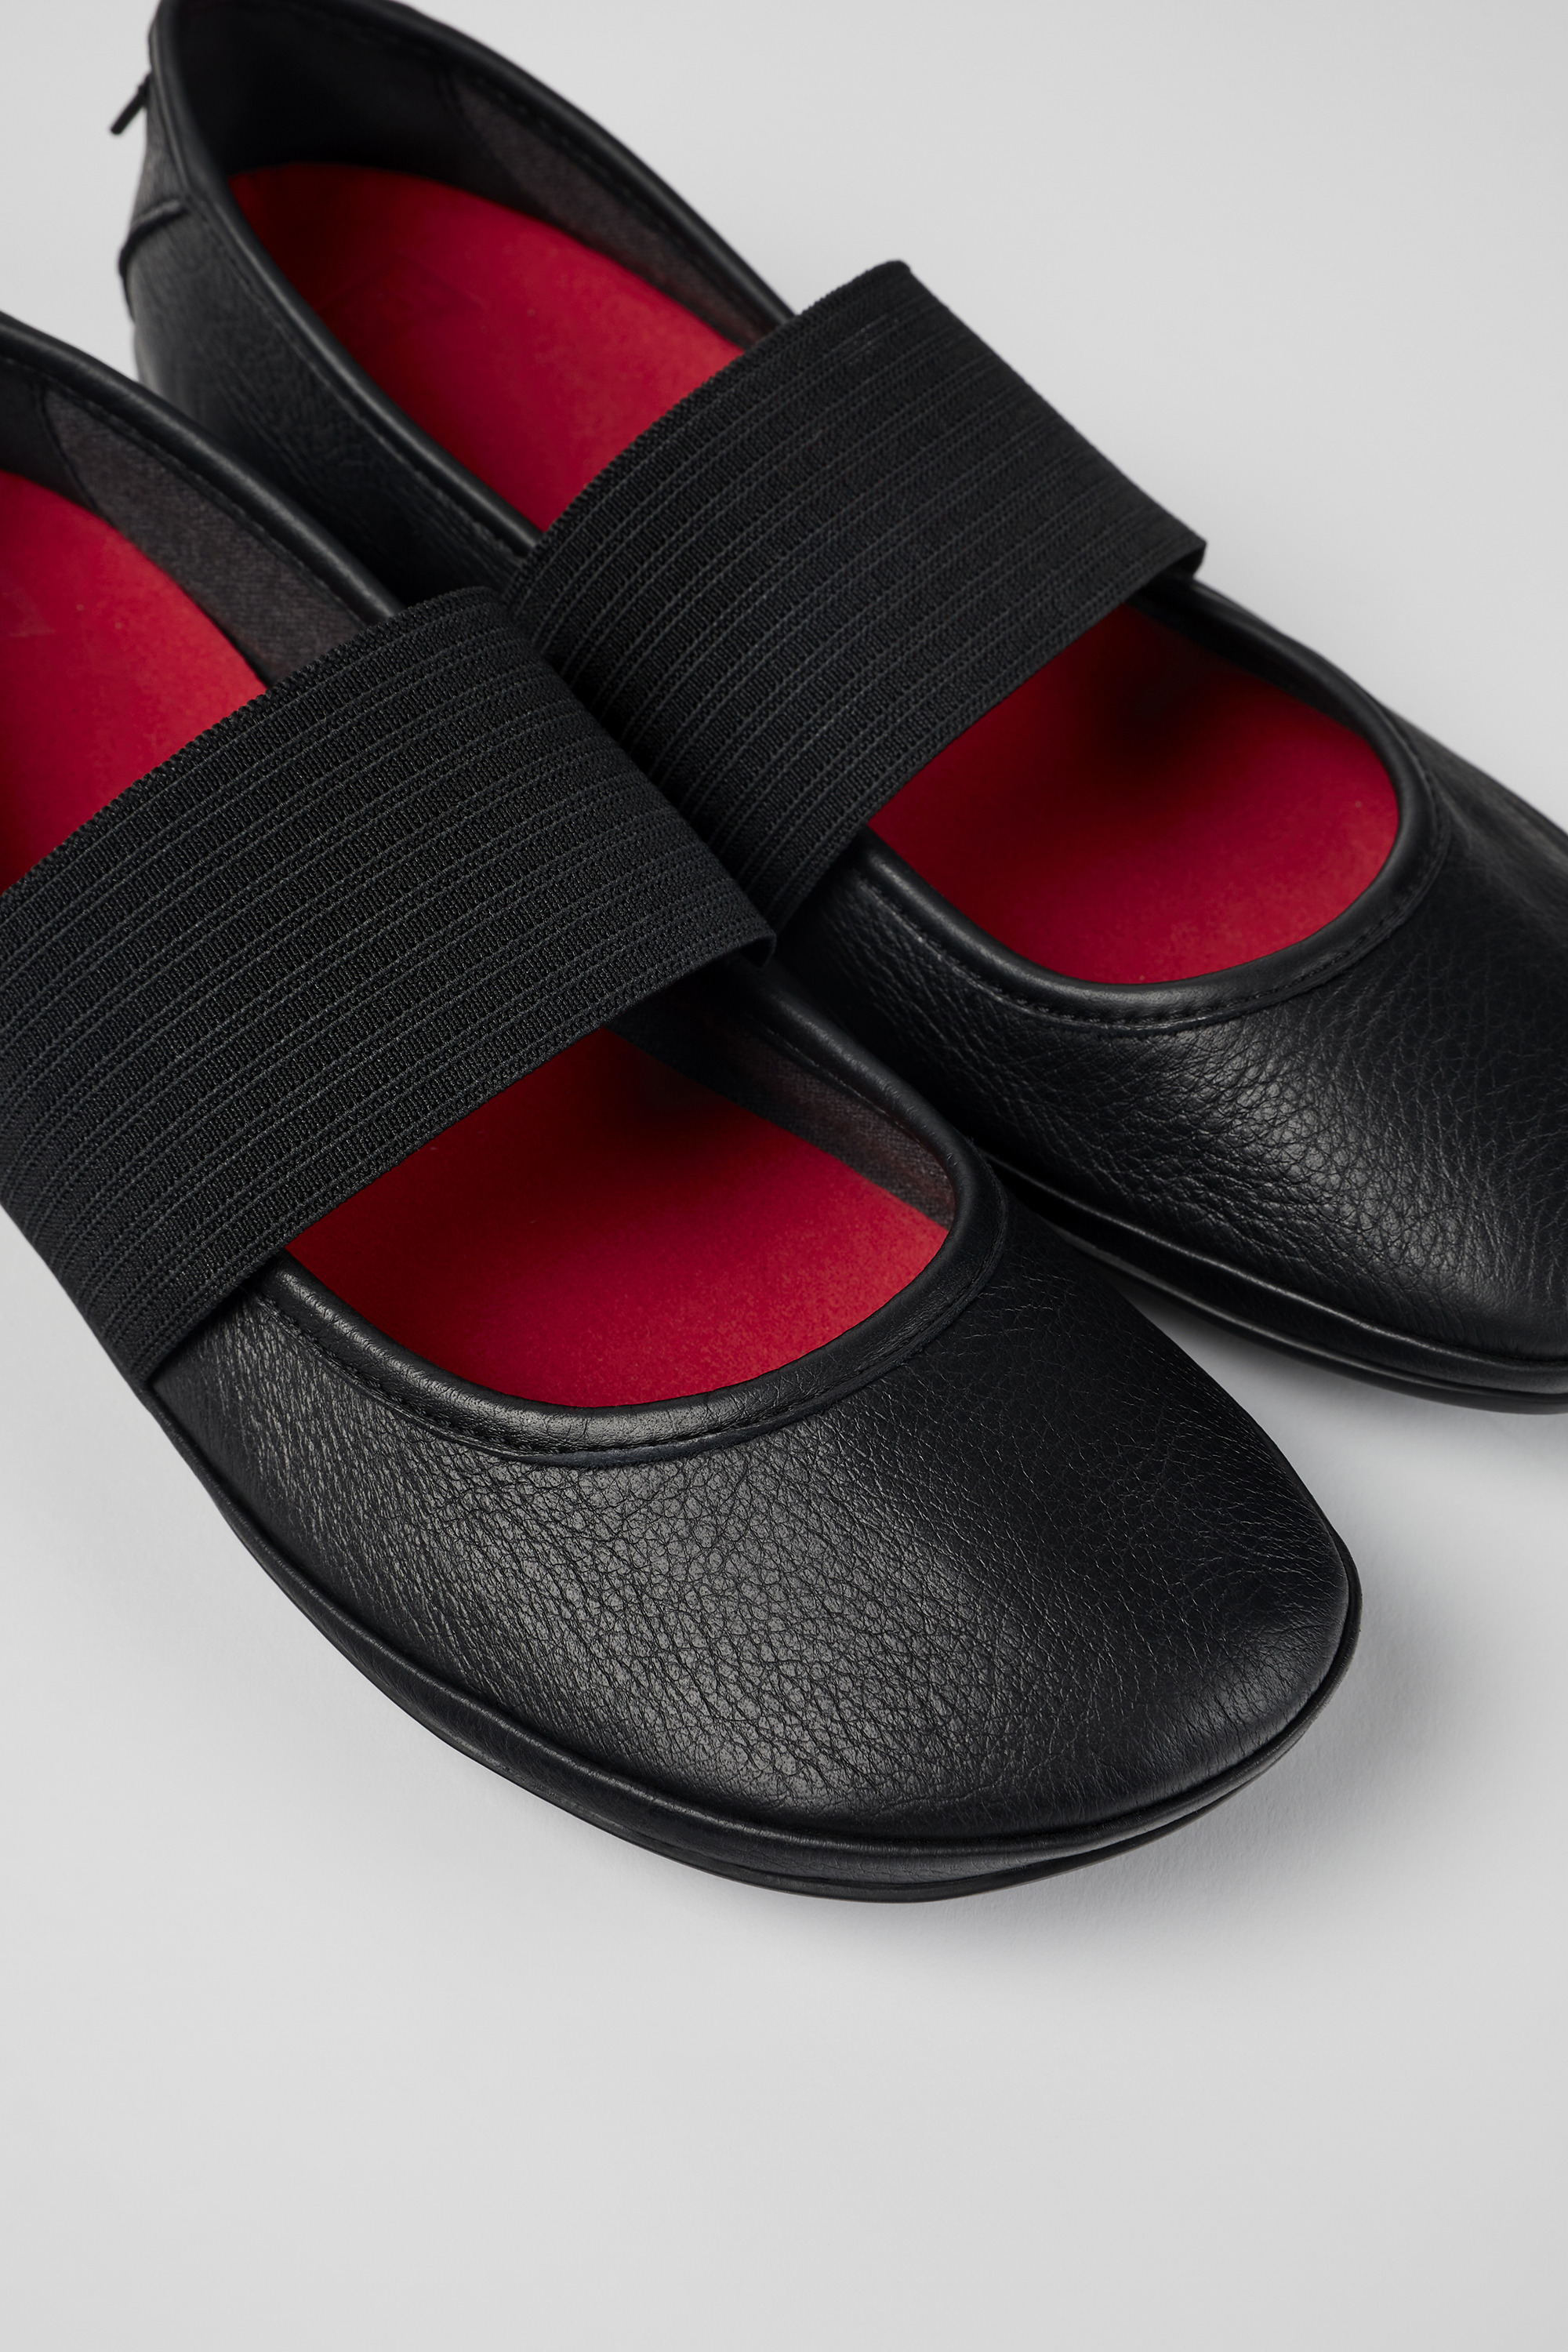 Enrich overholdelse Theseus Right Black Ballerinas for Women - Fall/Winter collection - Camper  Luxembourg